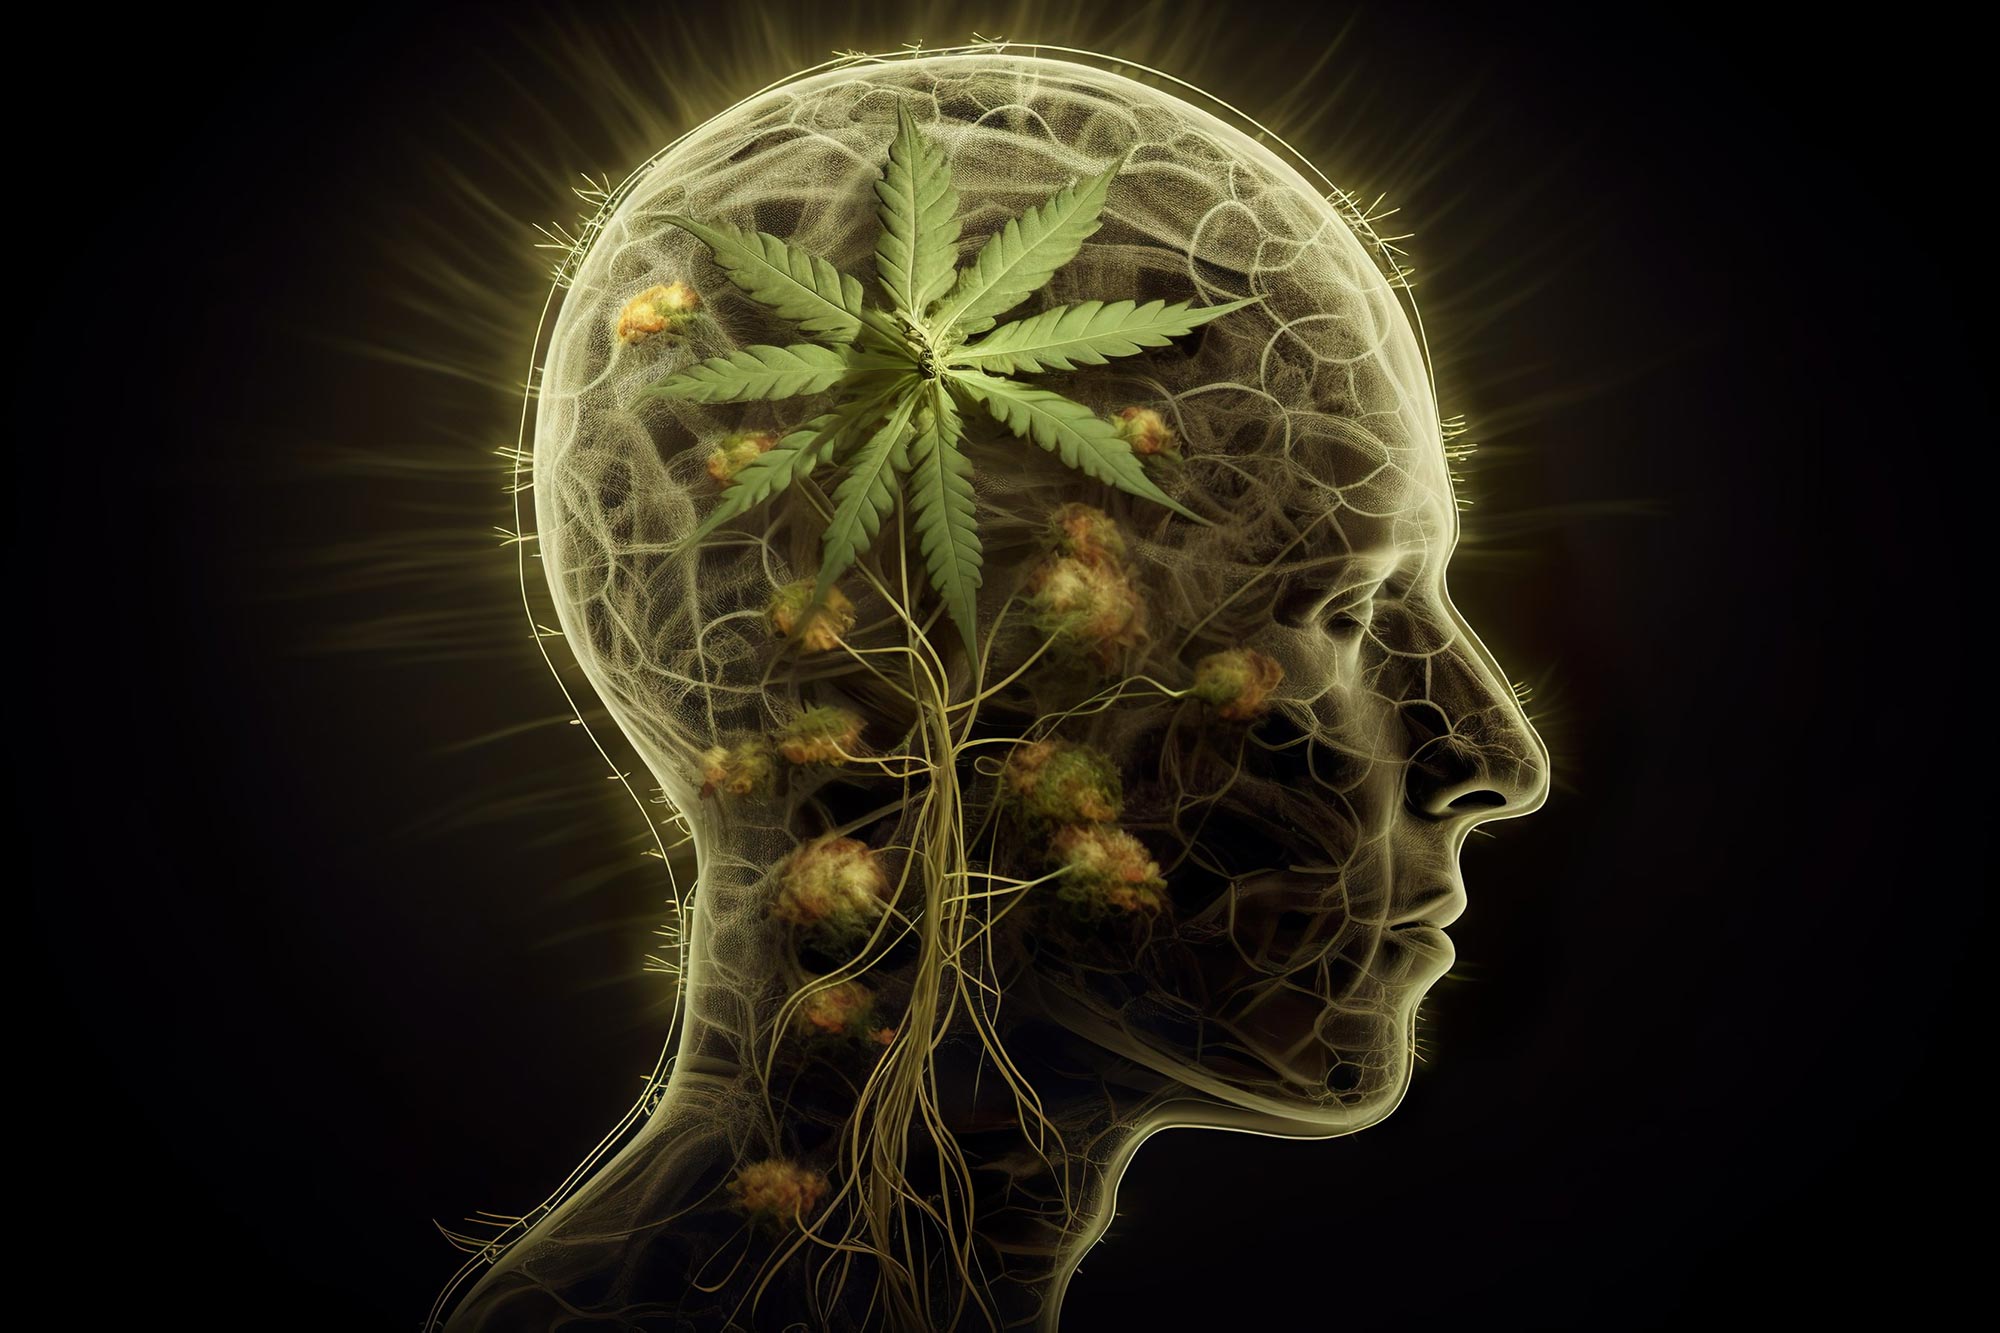 Impacting Even Medical Usage – Scientists Uncover Potential Health Hazard in Cannabis